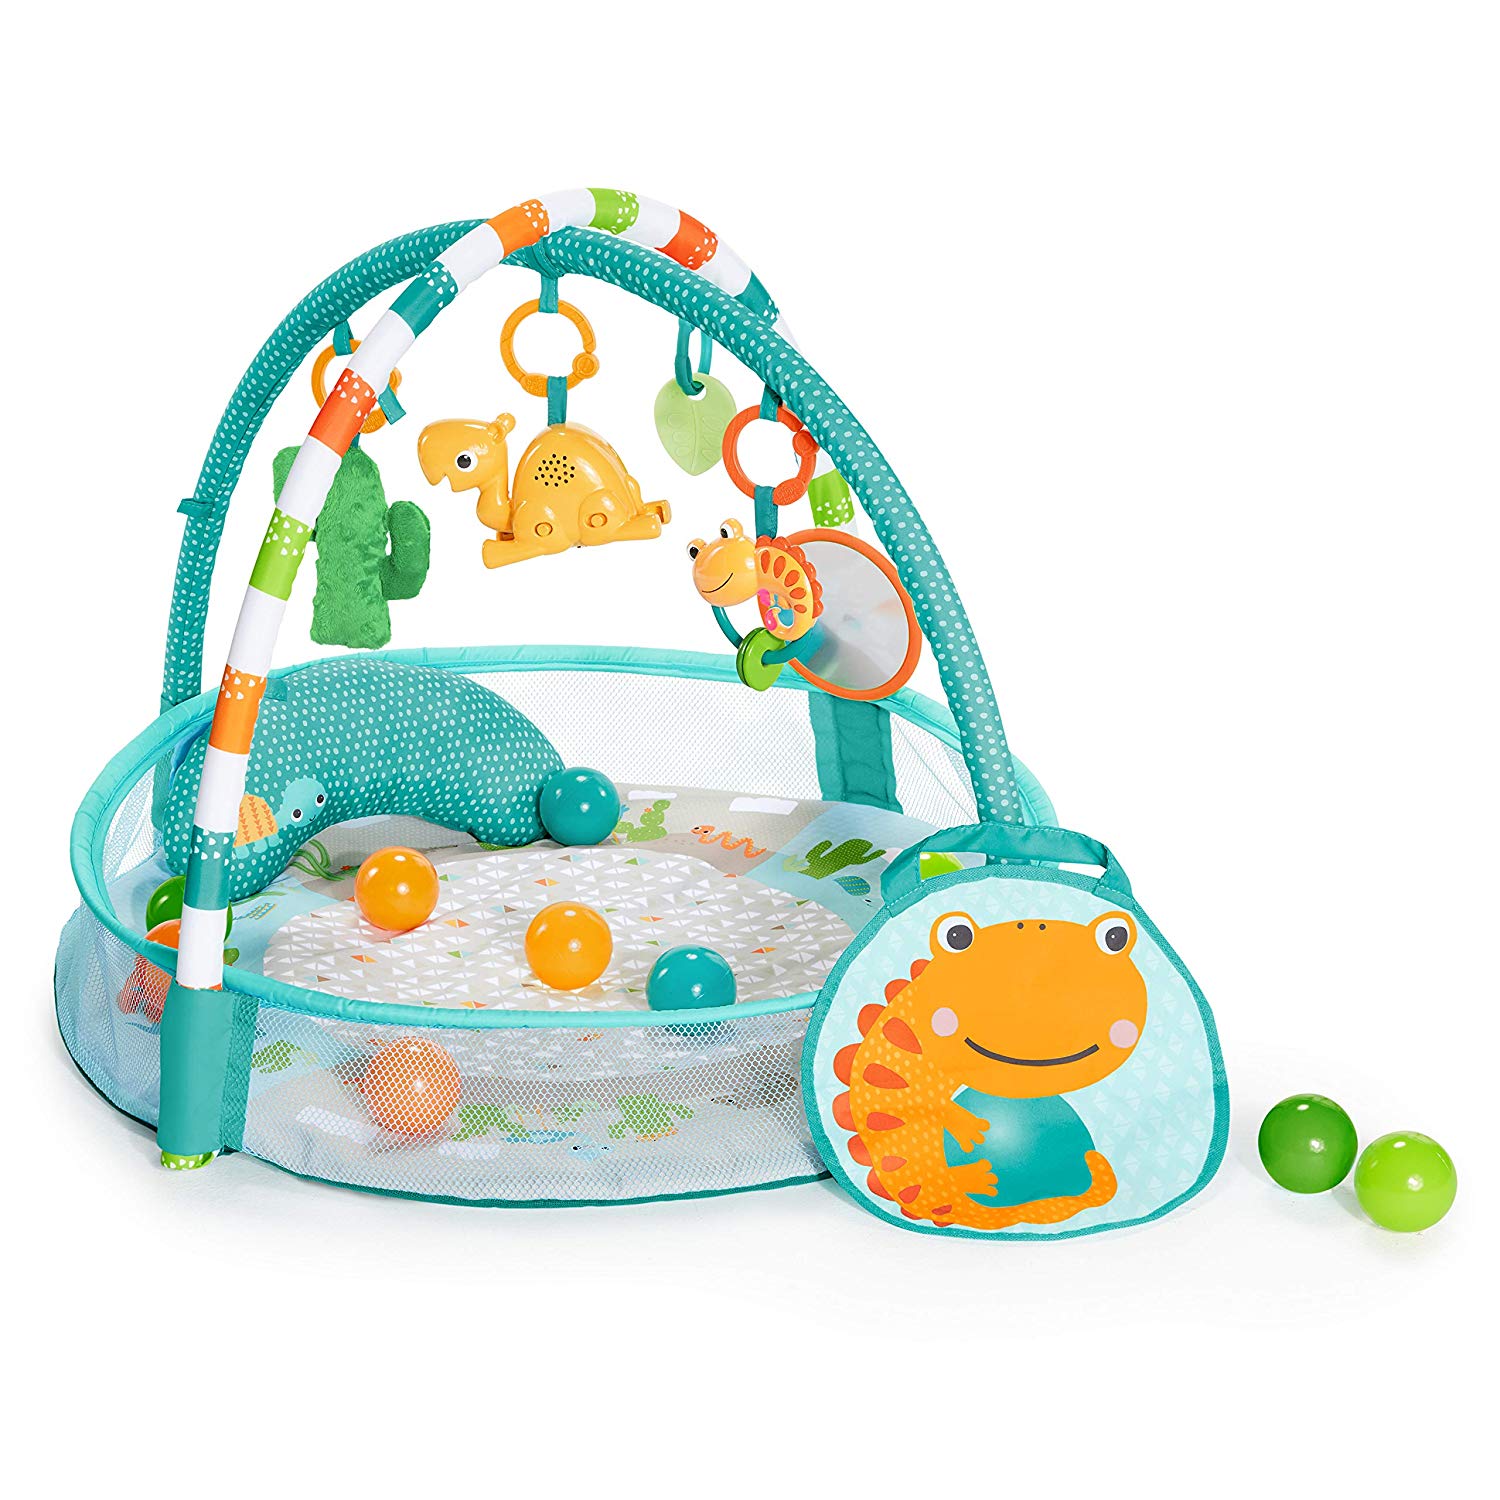 Bright Starts 4 in 1 Ball Pool and Play Mat Blue